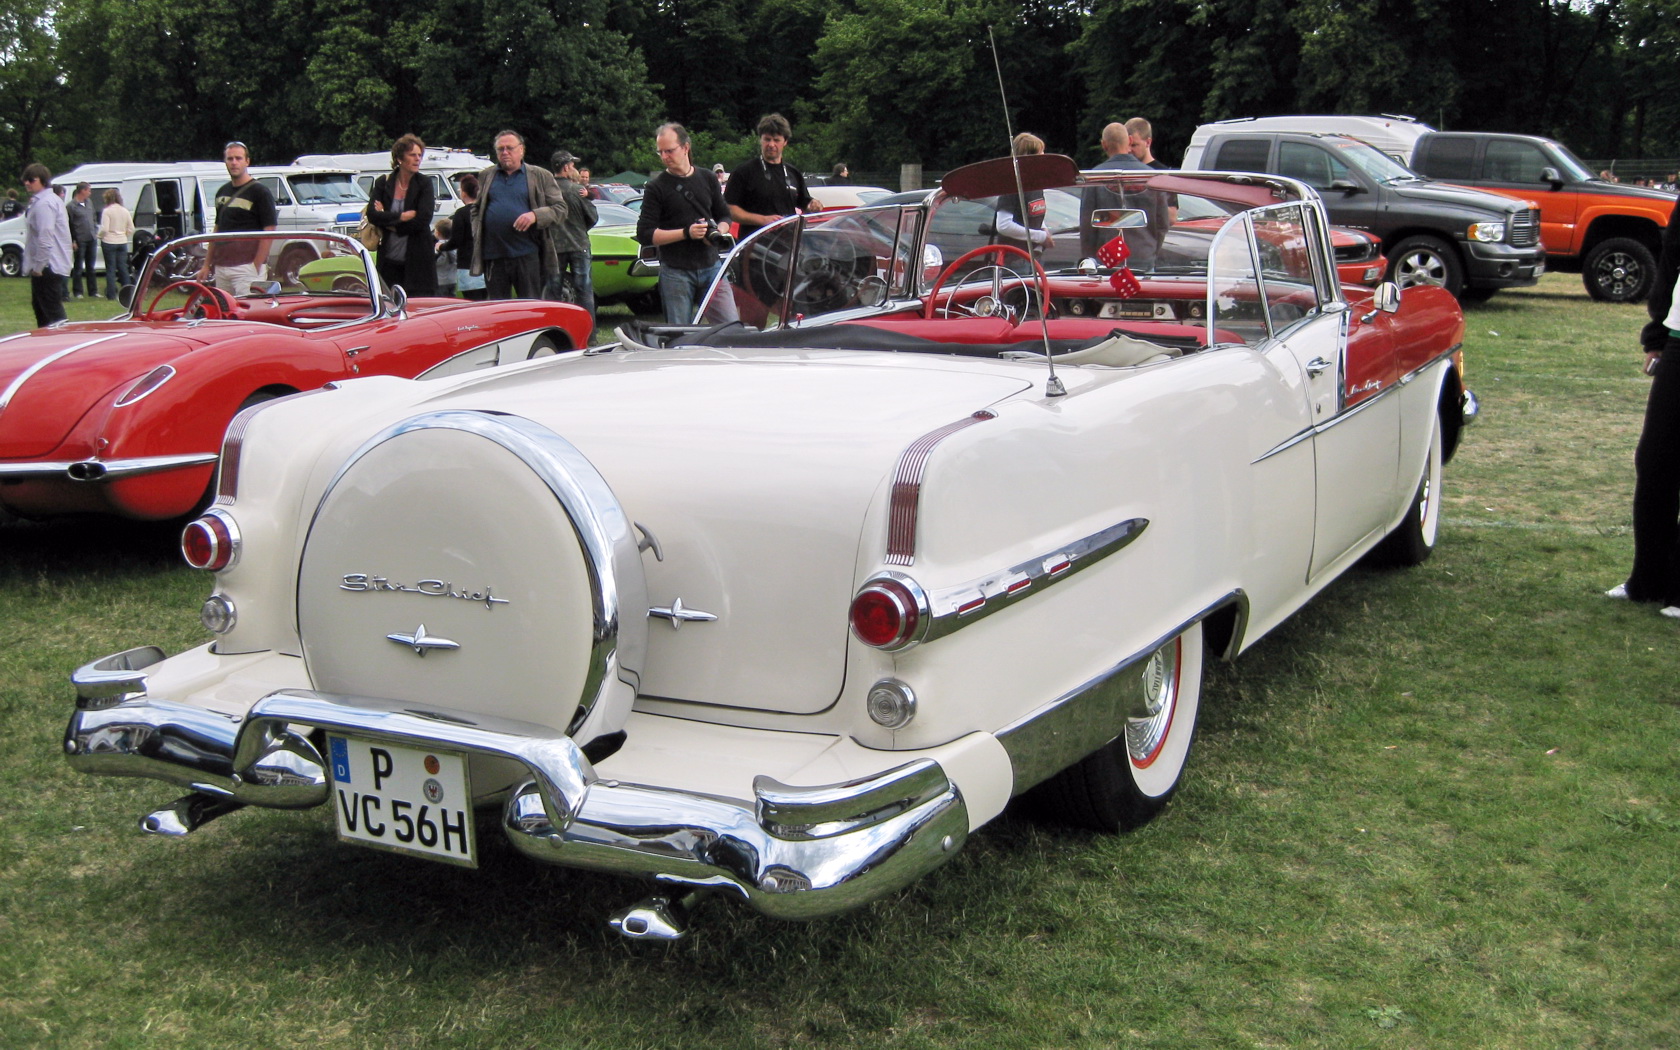 vintage cars on display on grassy field next to trees